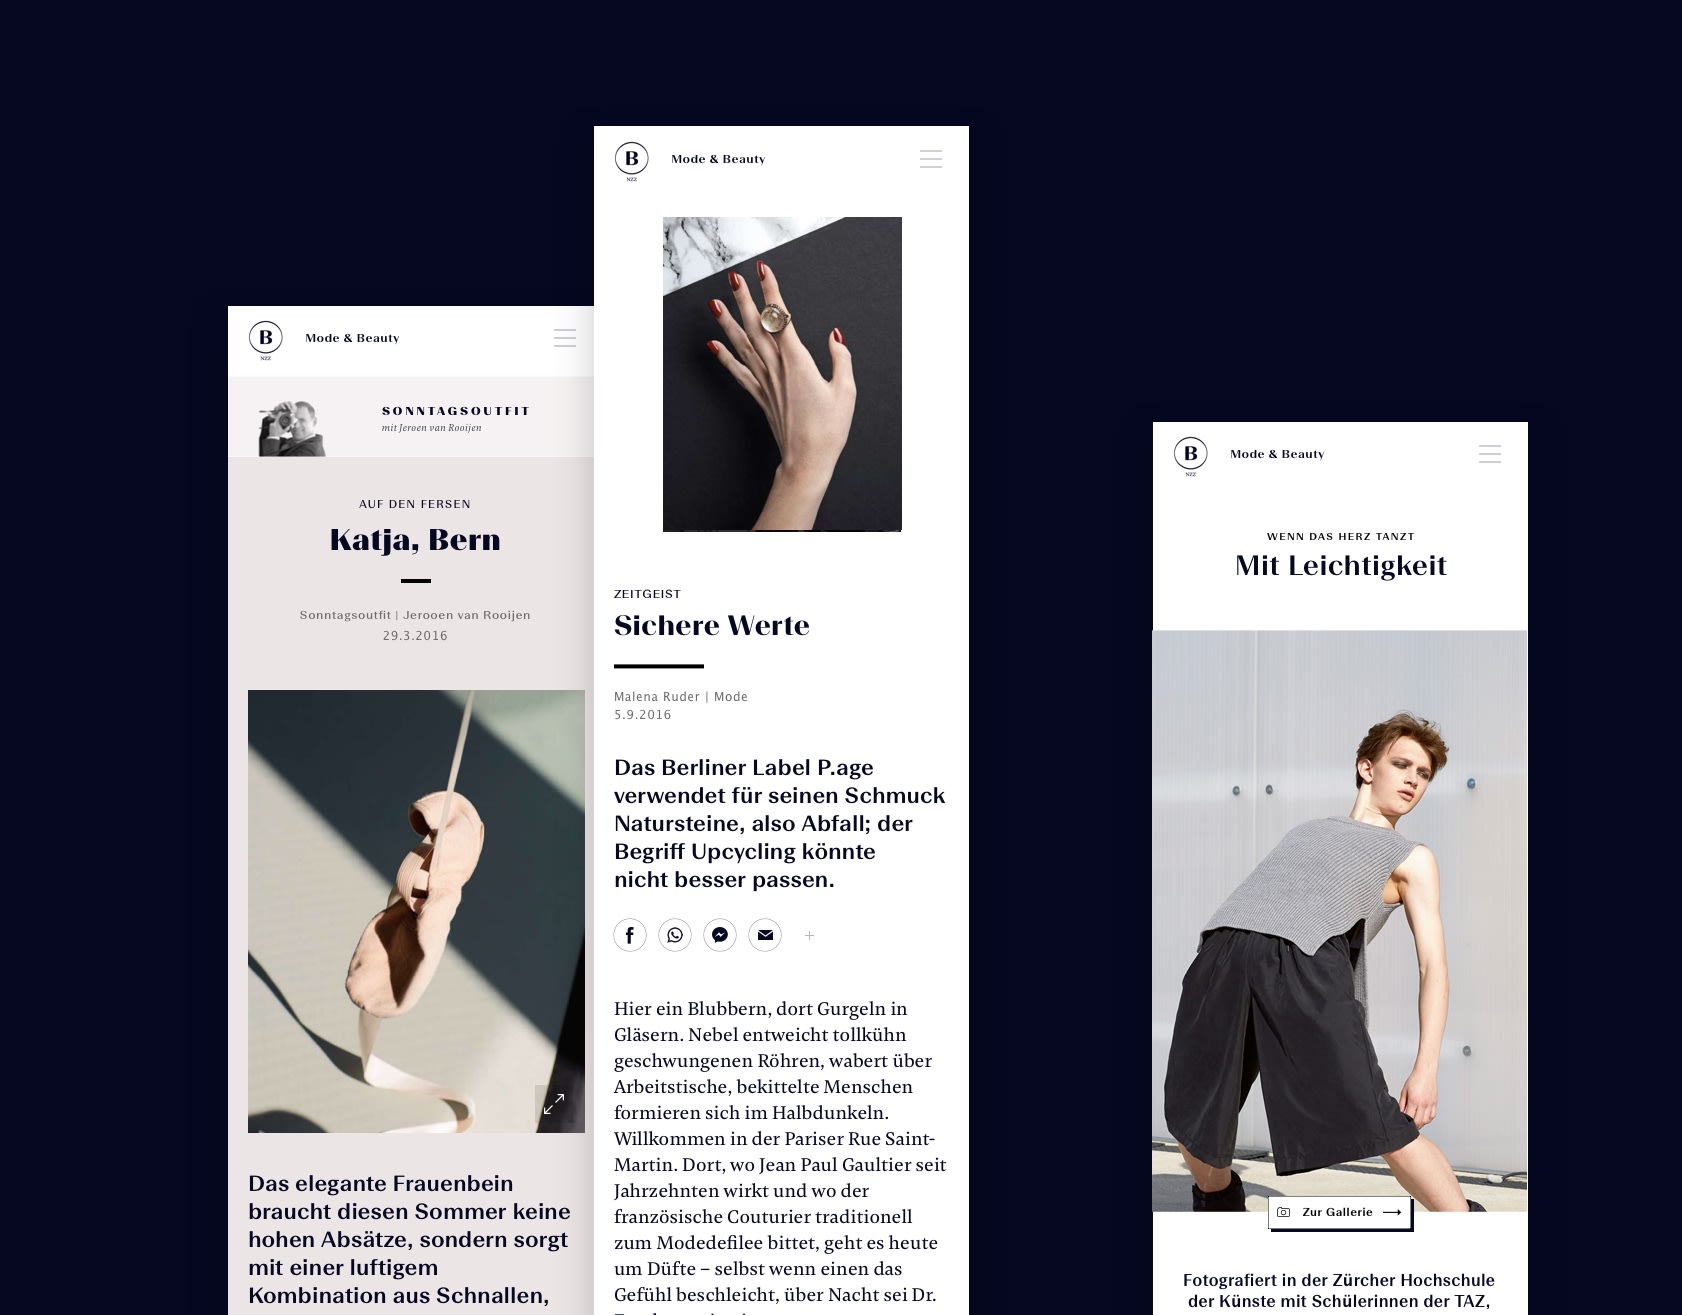 NZZ Article Formats